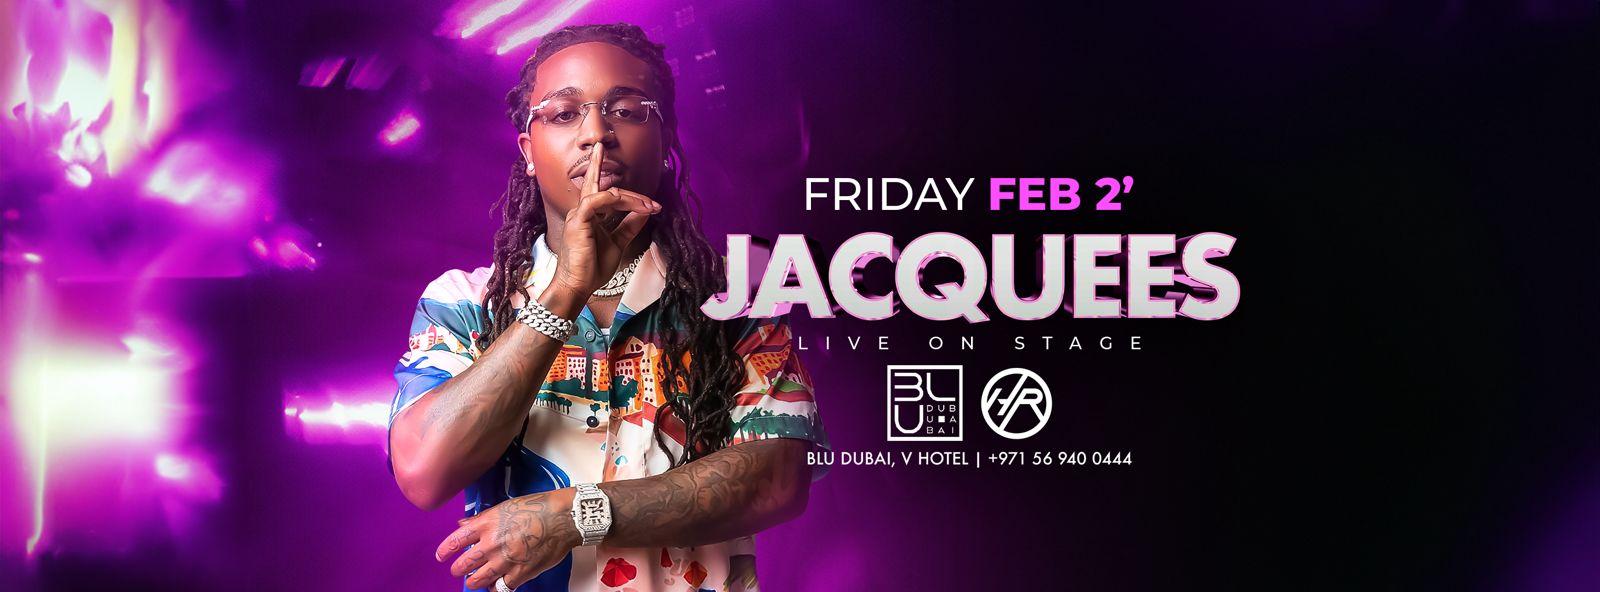 Jacquees Returns to BLU Dubai this Friday